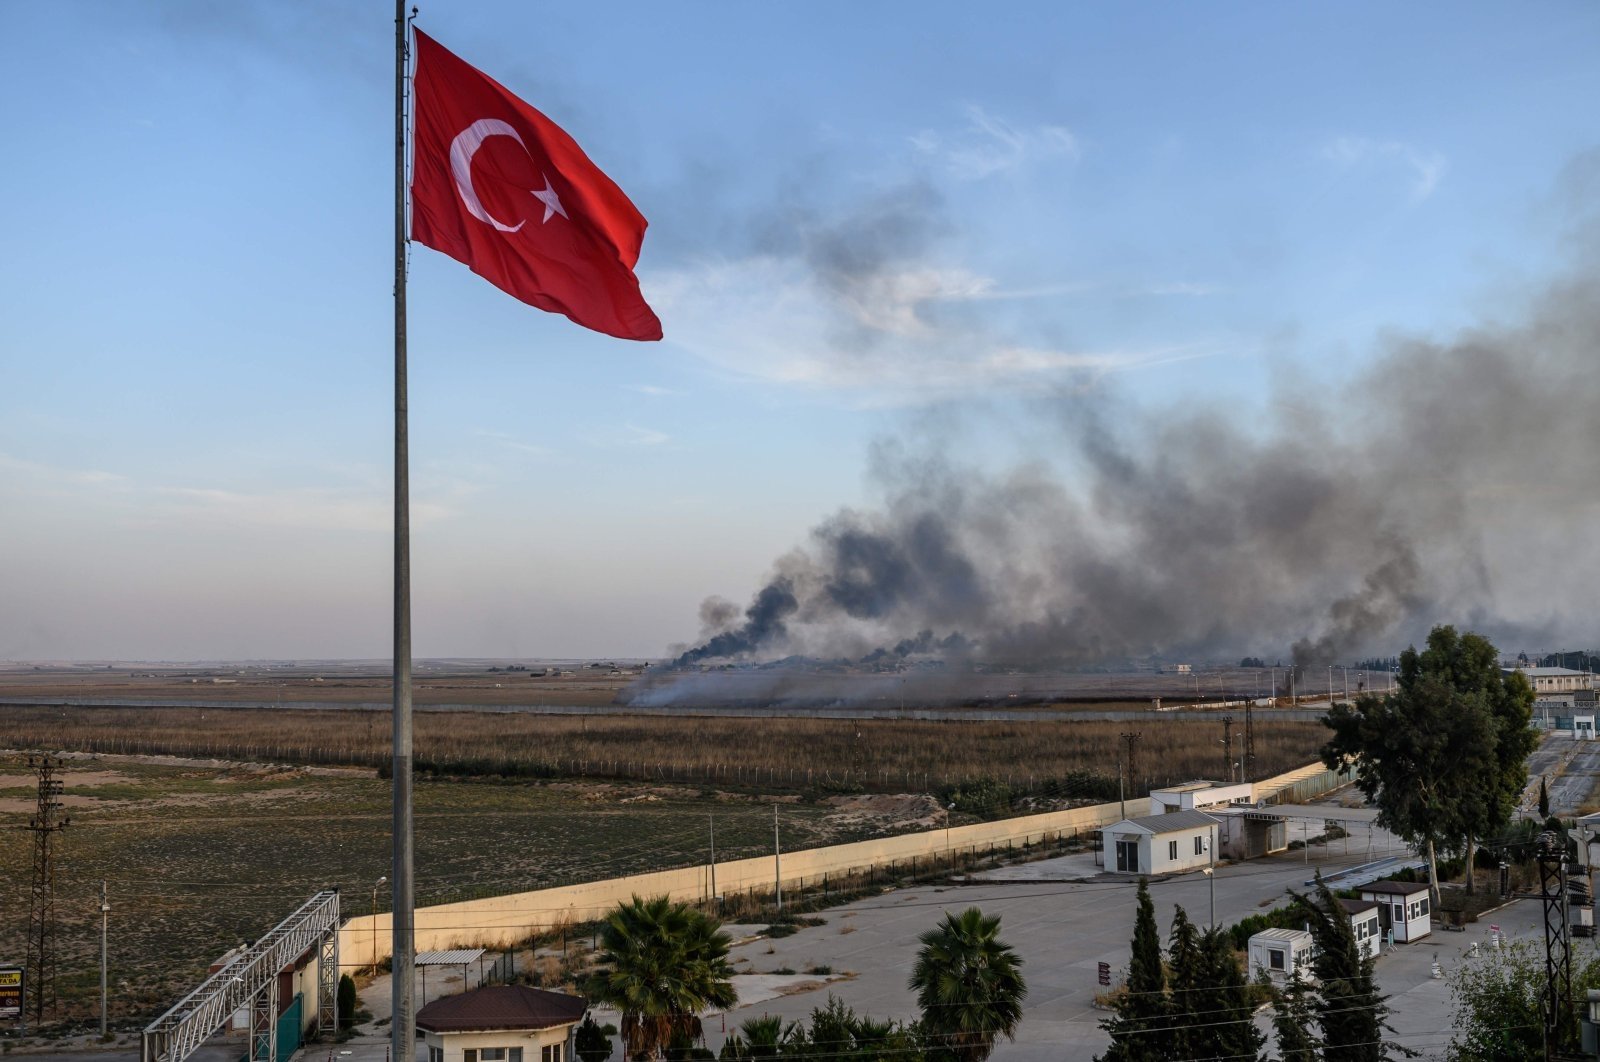 Smoke rises from the Syrian town of Tal Abyad, in a picture taken from the Turkish side of the border where the Turkish flag is seen near Akçakale, Oct. 10, 2019. (AFP Photo)